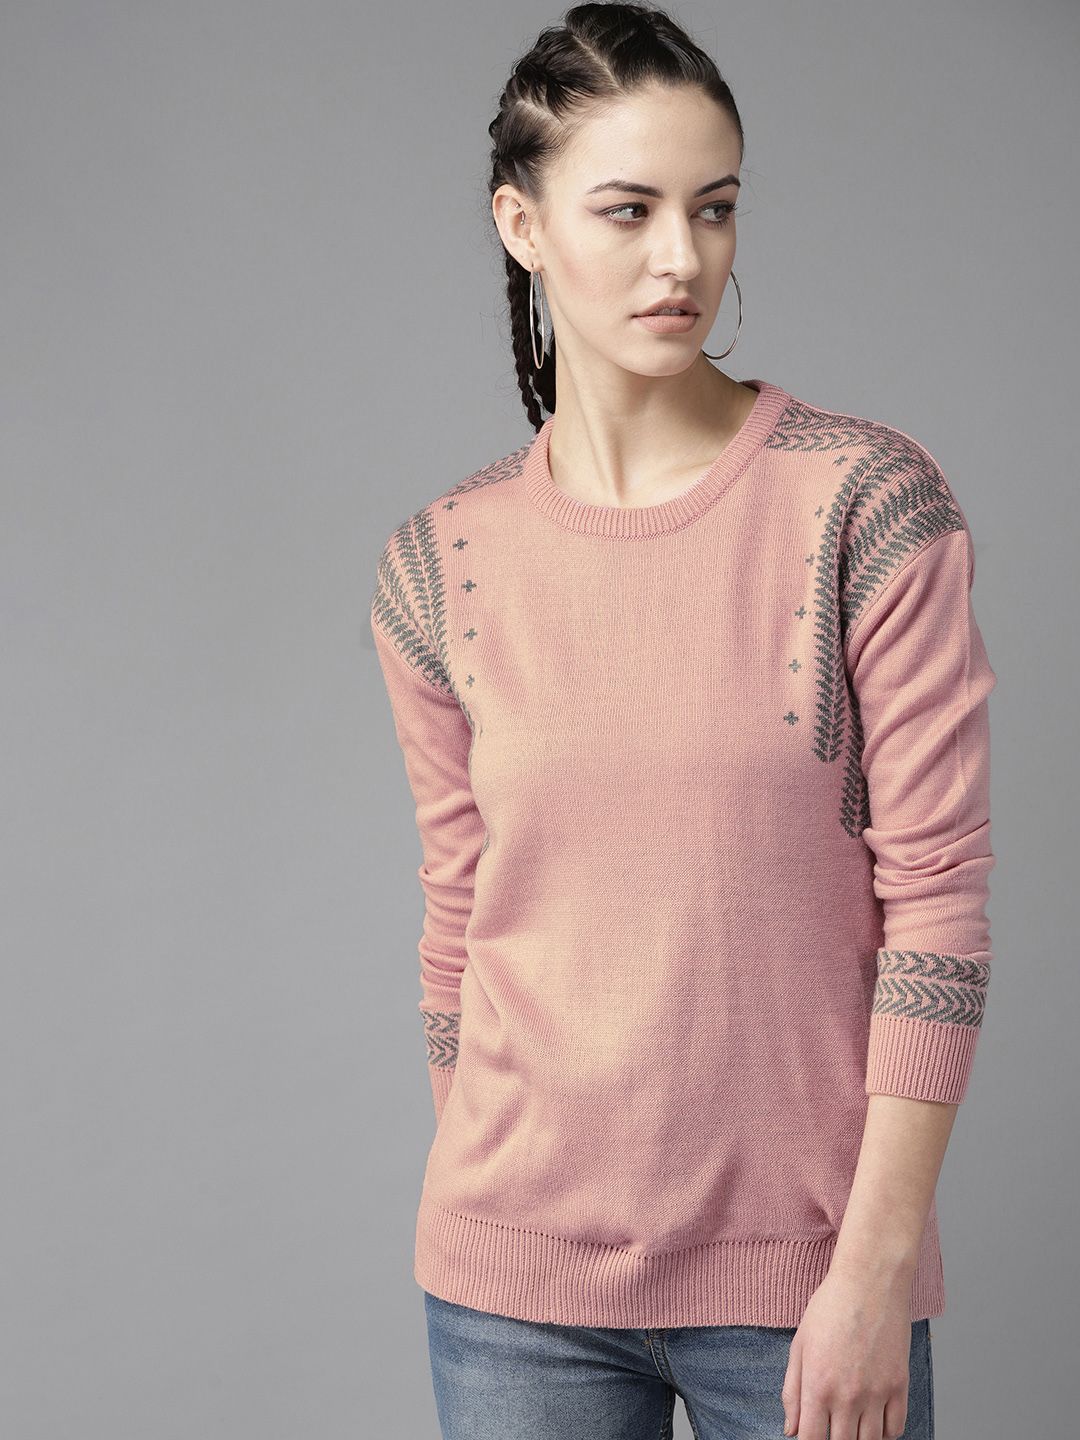 The Roadster Lifestyle Co Women Pink & Grey Solid Sweater Price in India